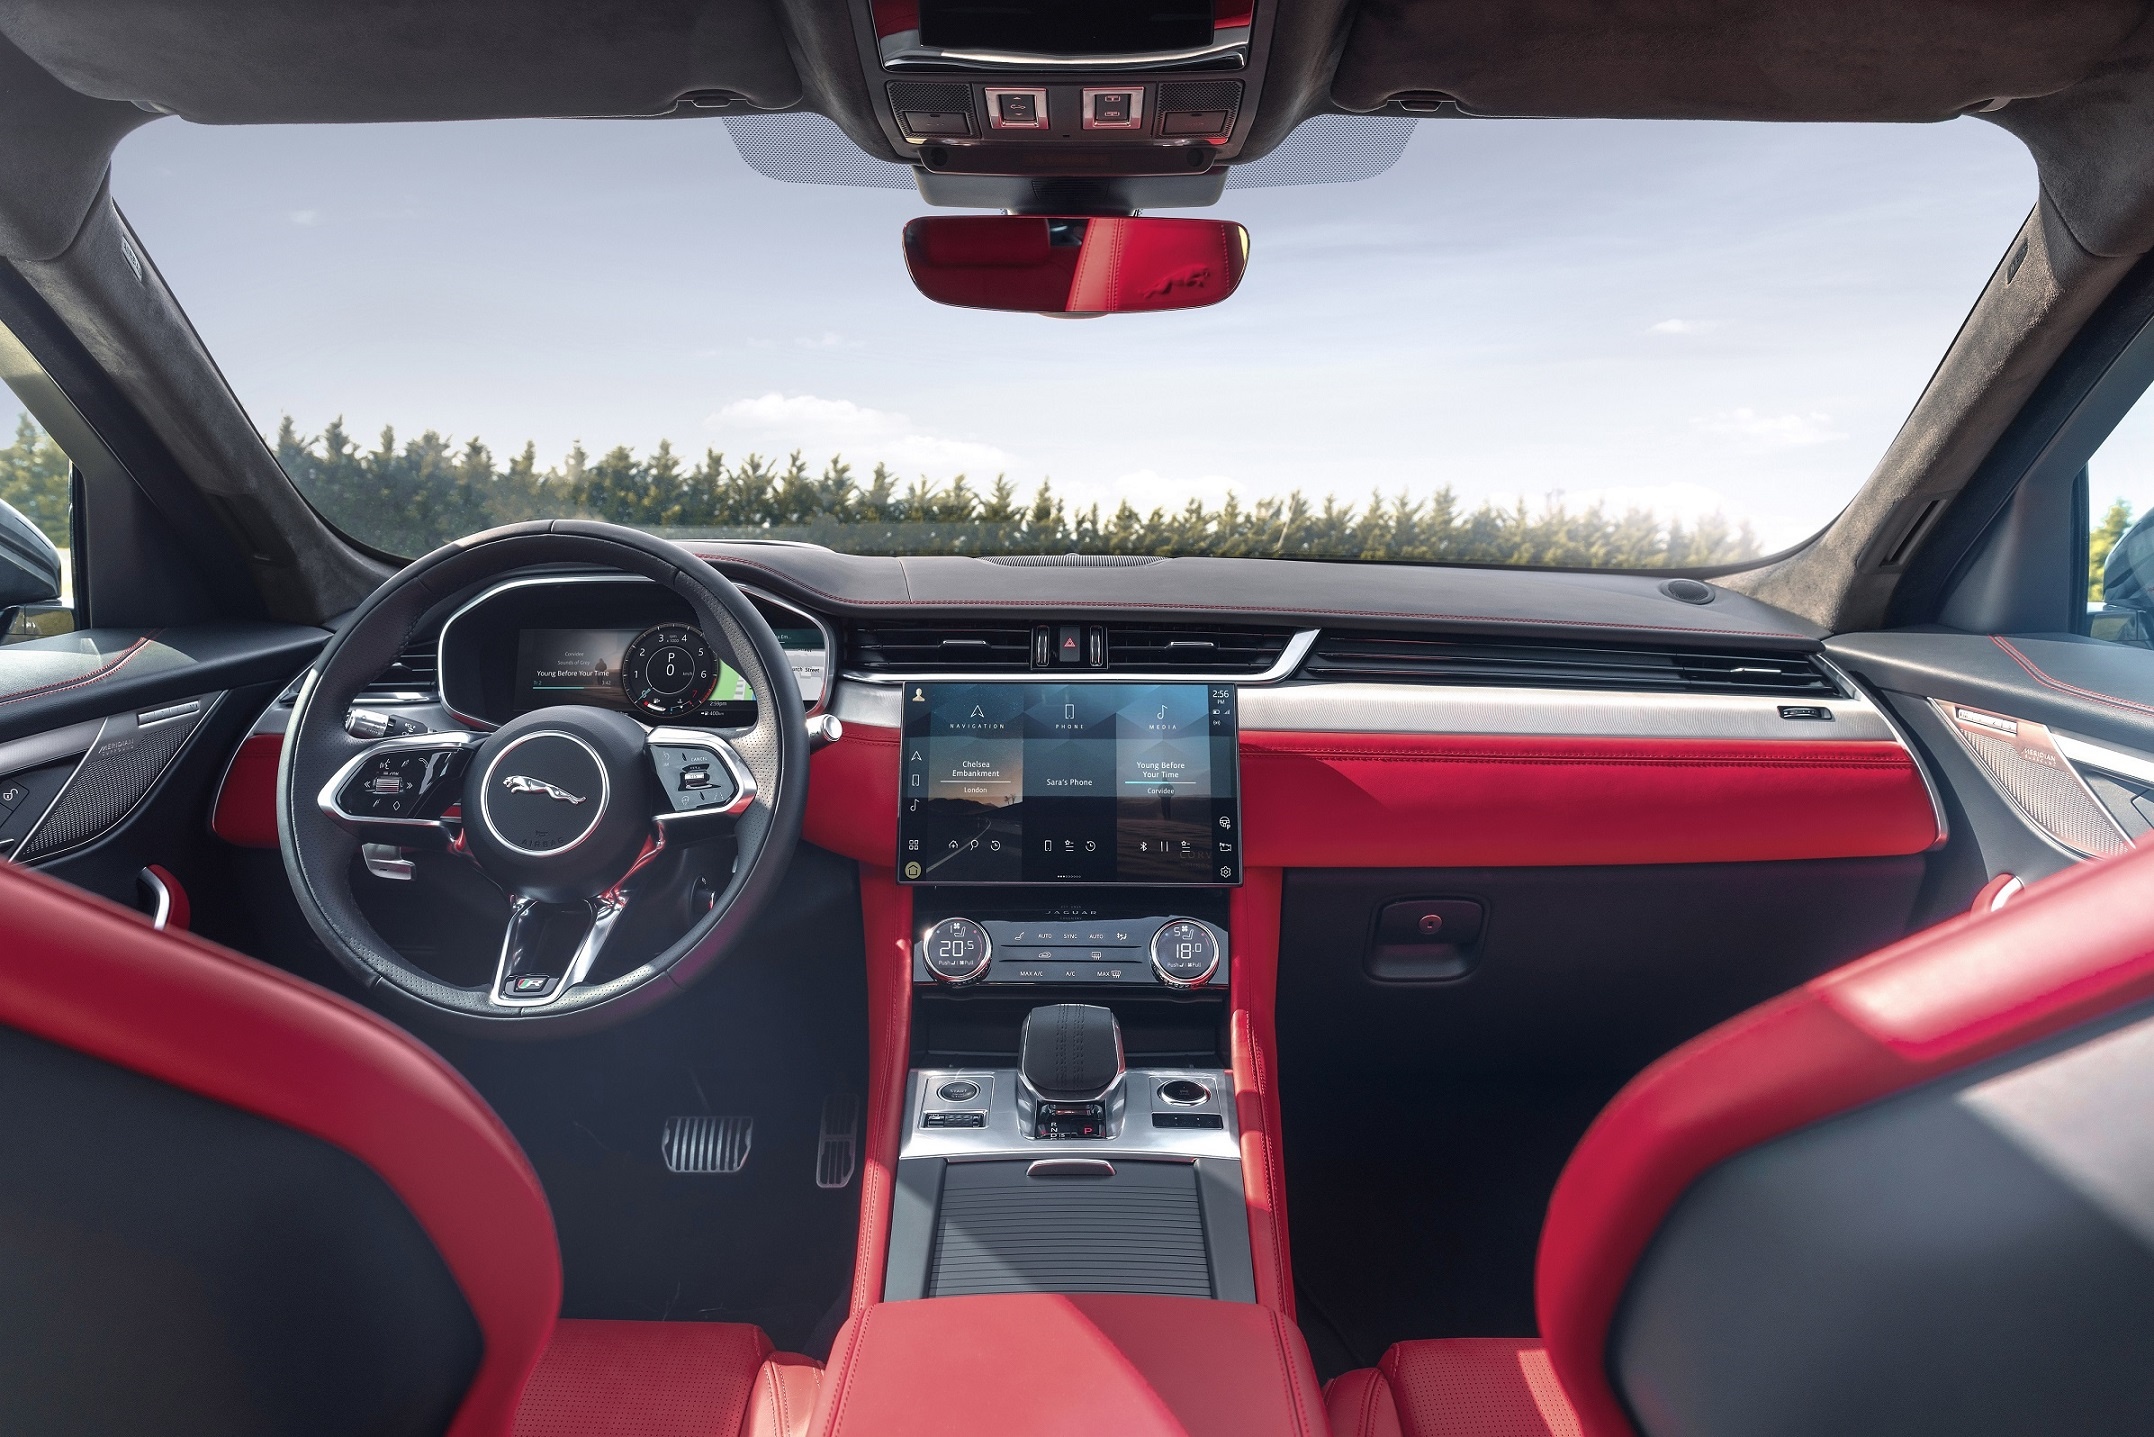 Jaguar Land Rover’s Pivi Pro Infotainment System Recognised By Autobest Awards